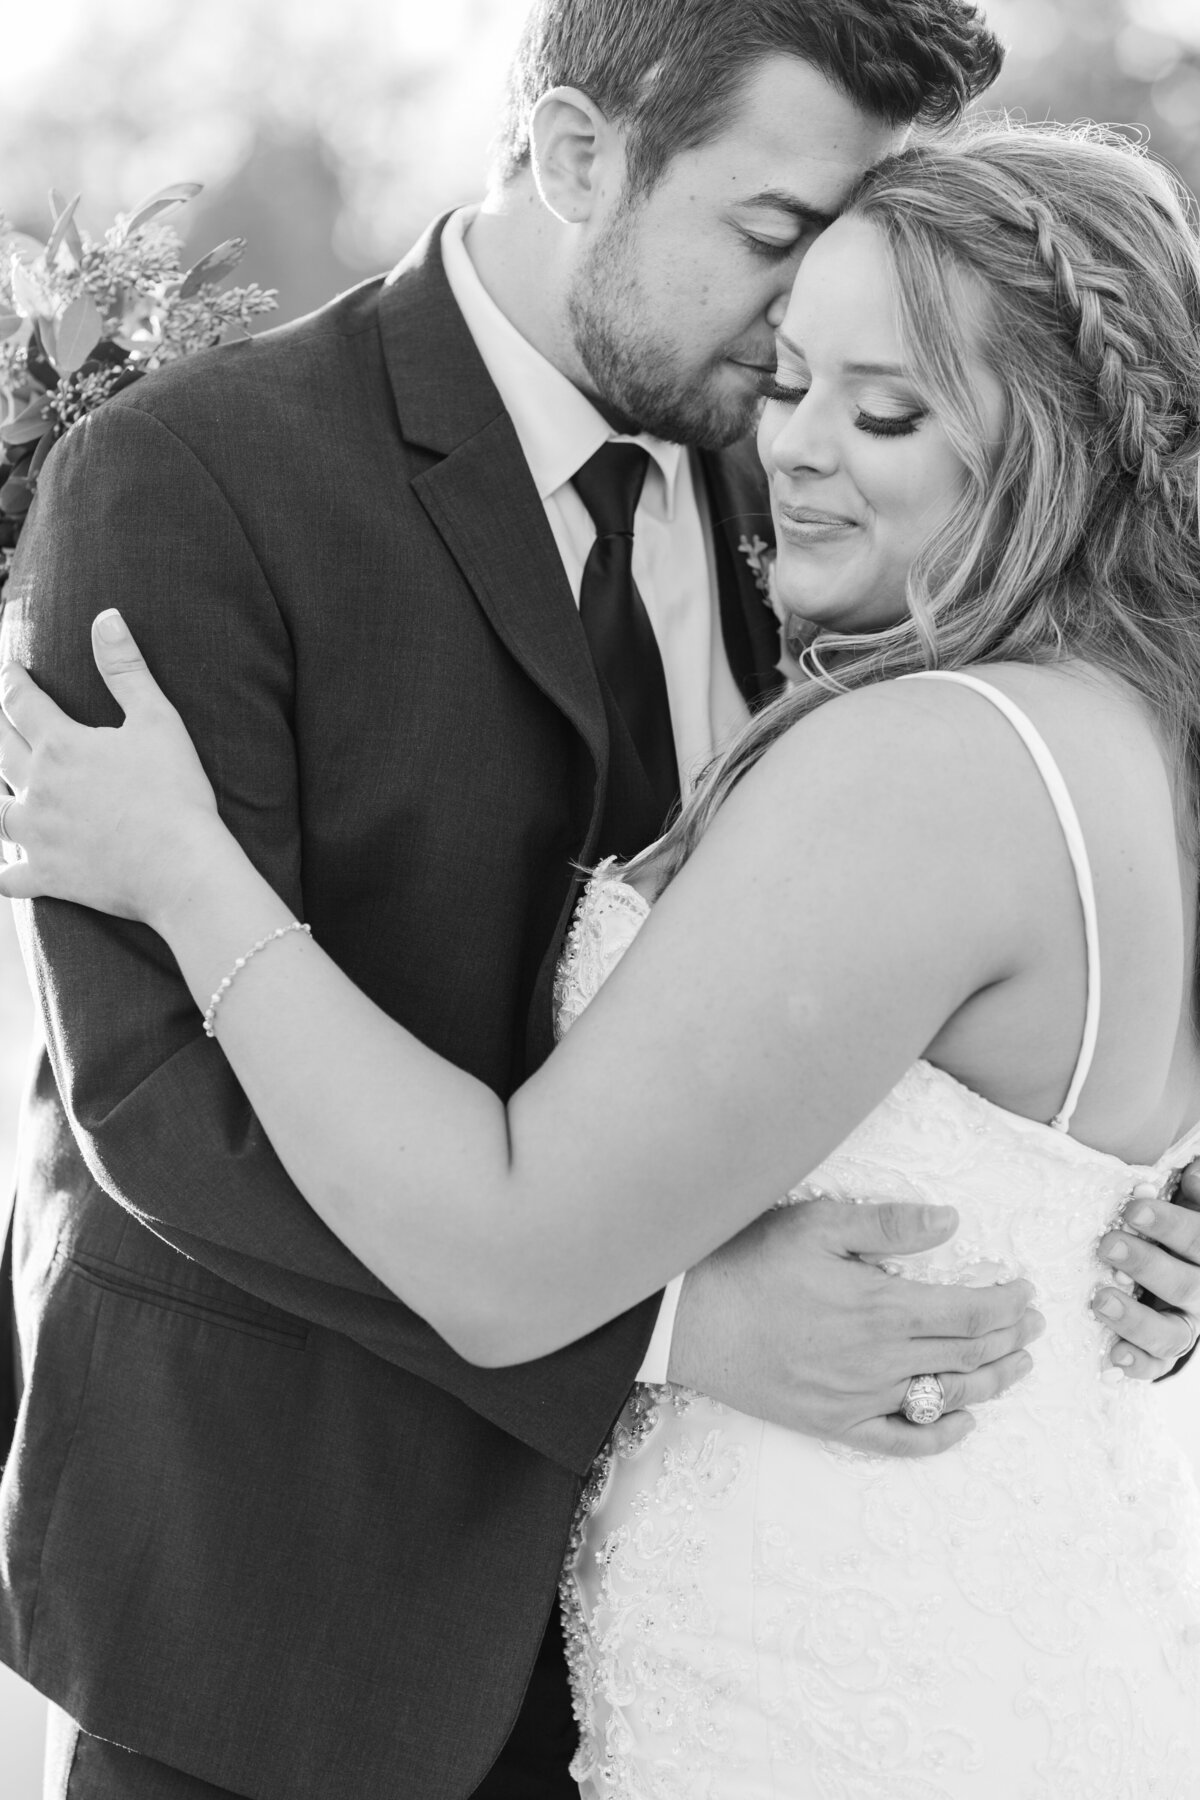 Black and white of Groom nuzzling bride and smiling after the ceremony at Peach Creek Ranch